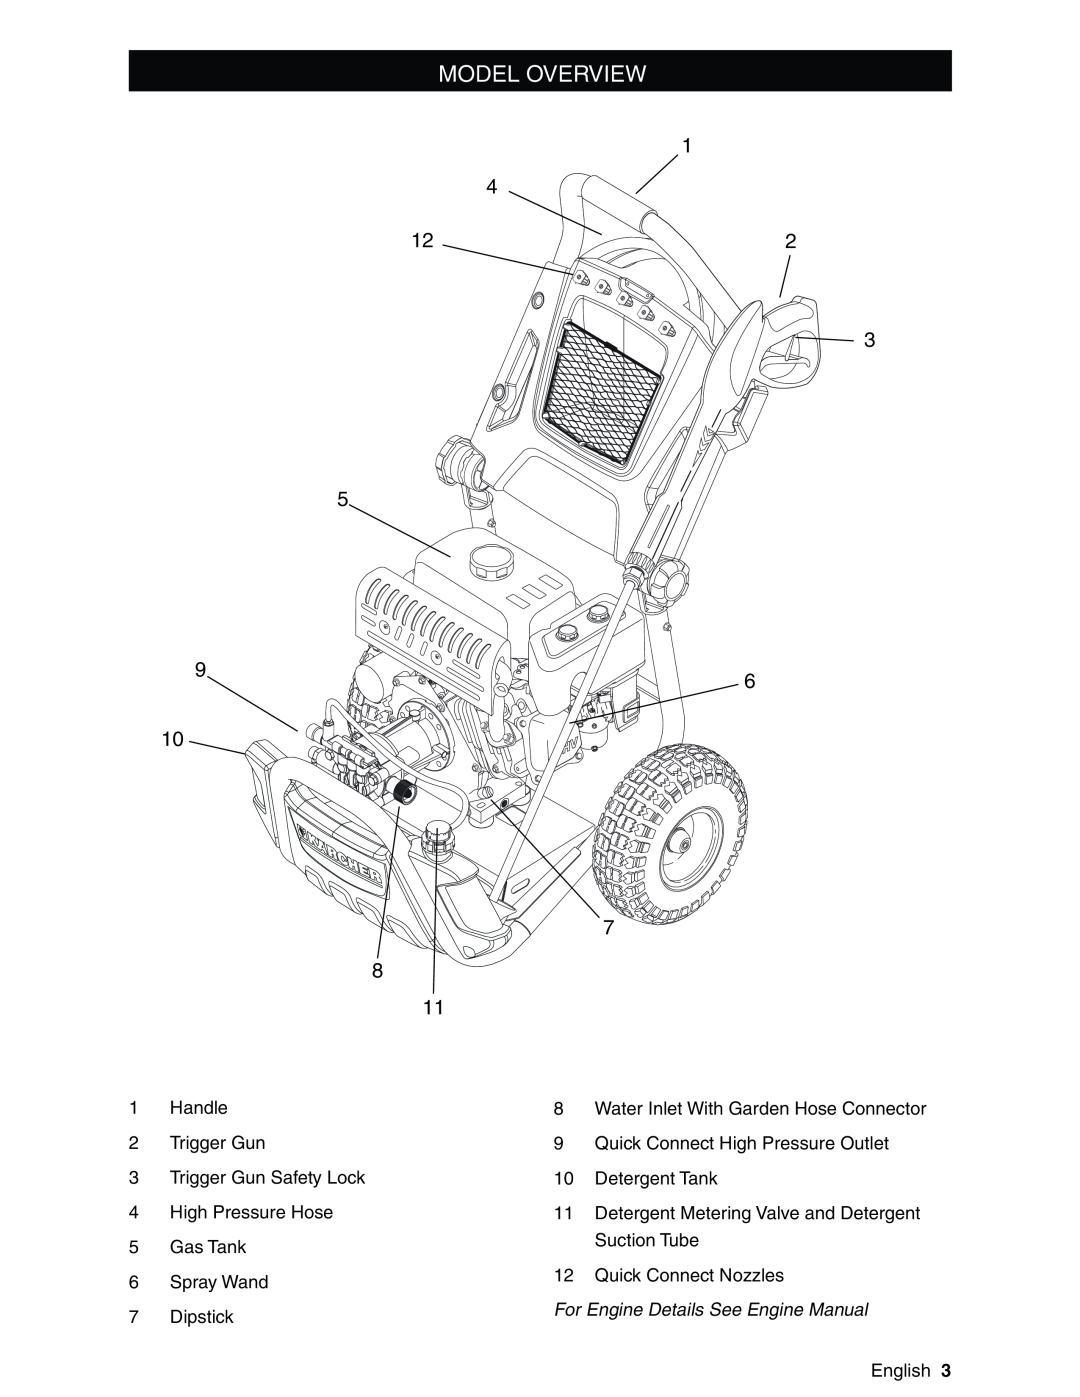 Karcher G2600XC, G2800XC manual Model Overview, For Engine Details See Engine Manual 